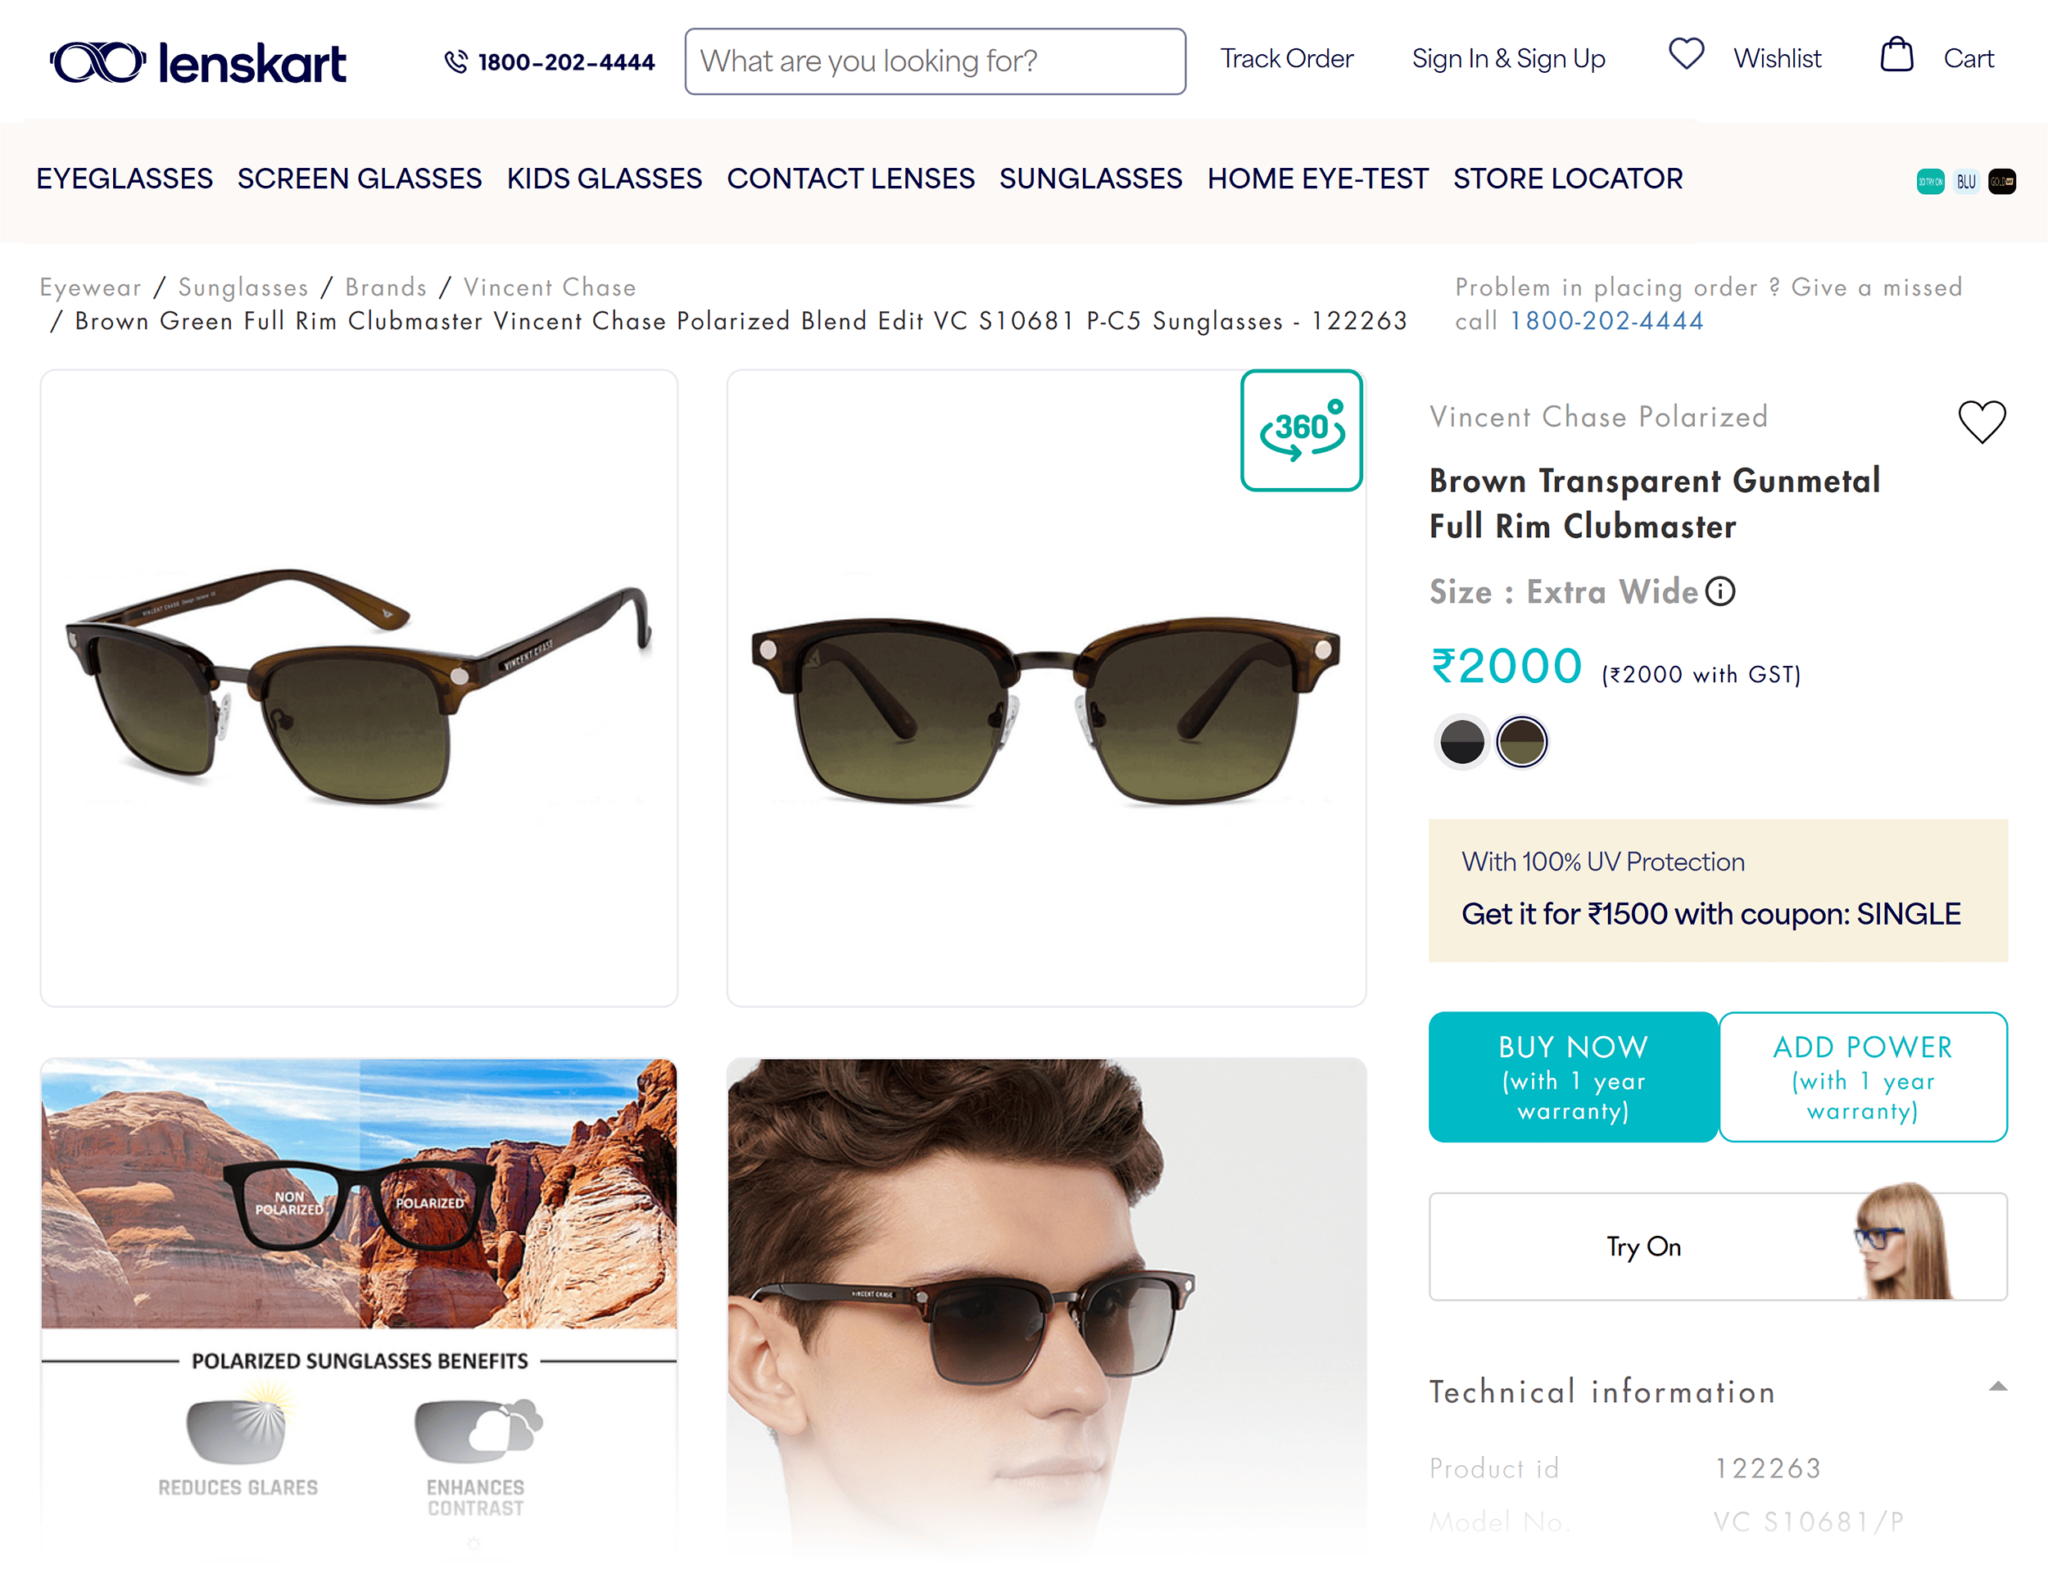 lenskart-sunglasses 20 Effective Product Page Examples (+ Best Practices)